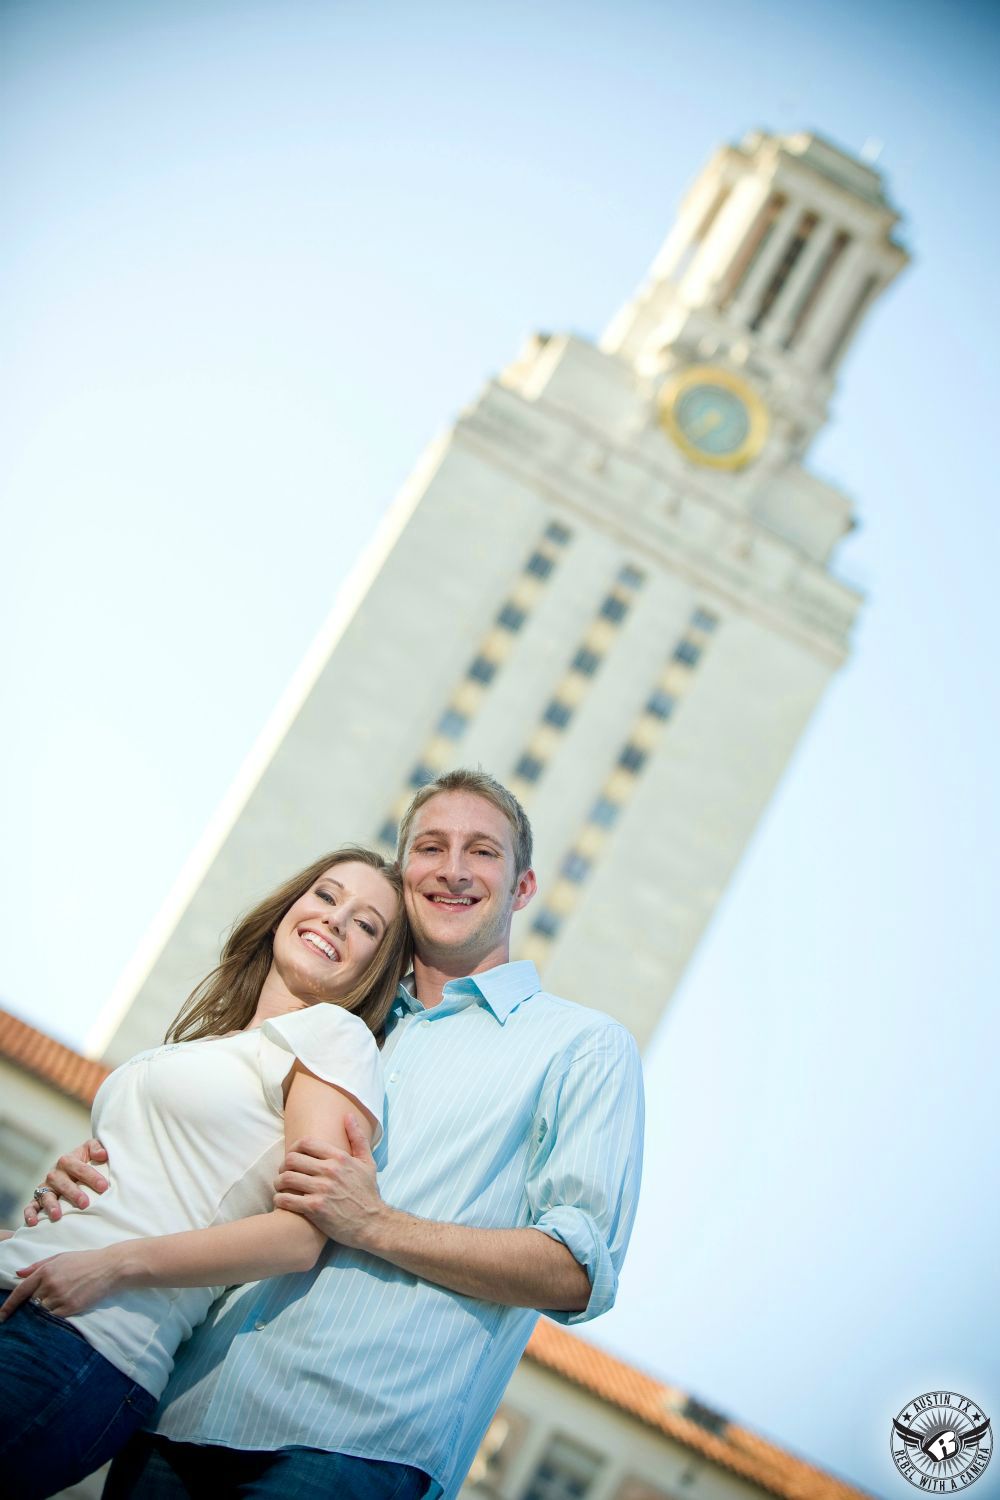 happy sandy haired girl wearing a white blouse and blue jeans is embraced by a happy sandy haired guy  with a blue button up shirt in front of the clock tower at UT Austin in this engagement portrait in texas